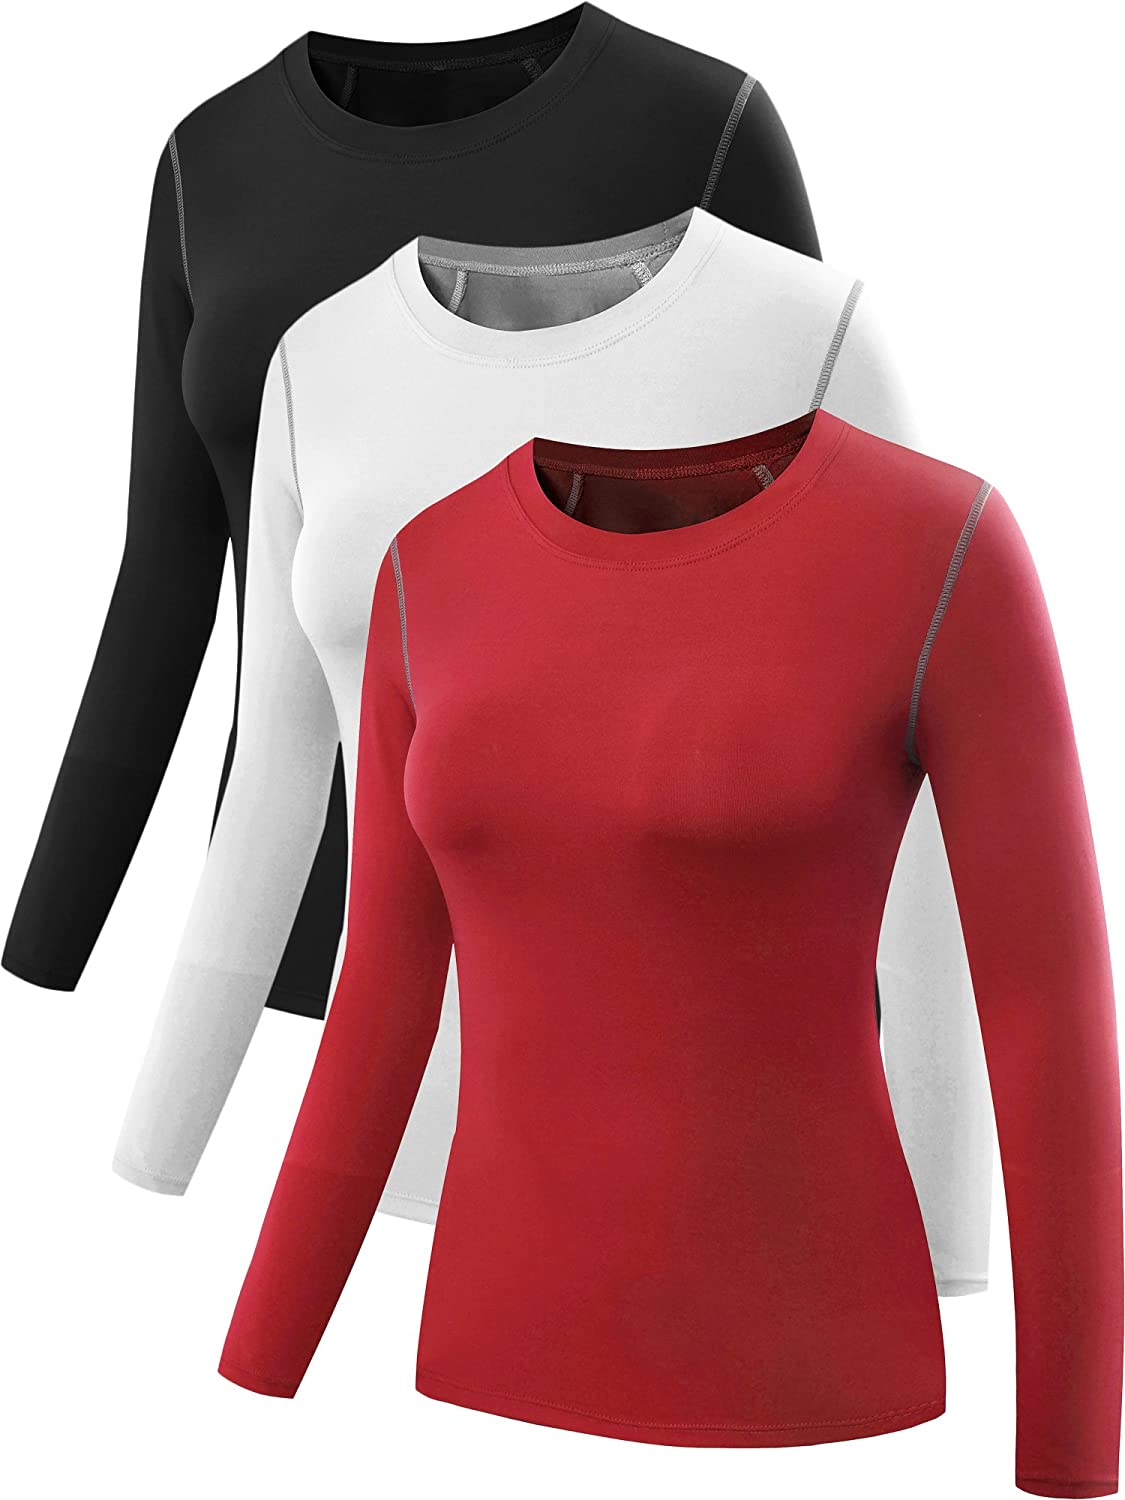 Neleus Women's 3 Pack Athletic Compression Long Sleeve T Shirt Dry Fit